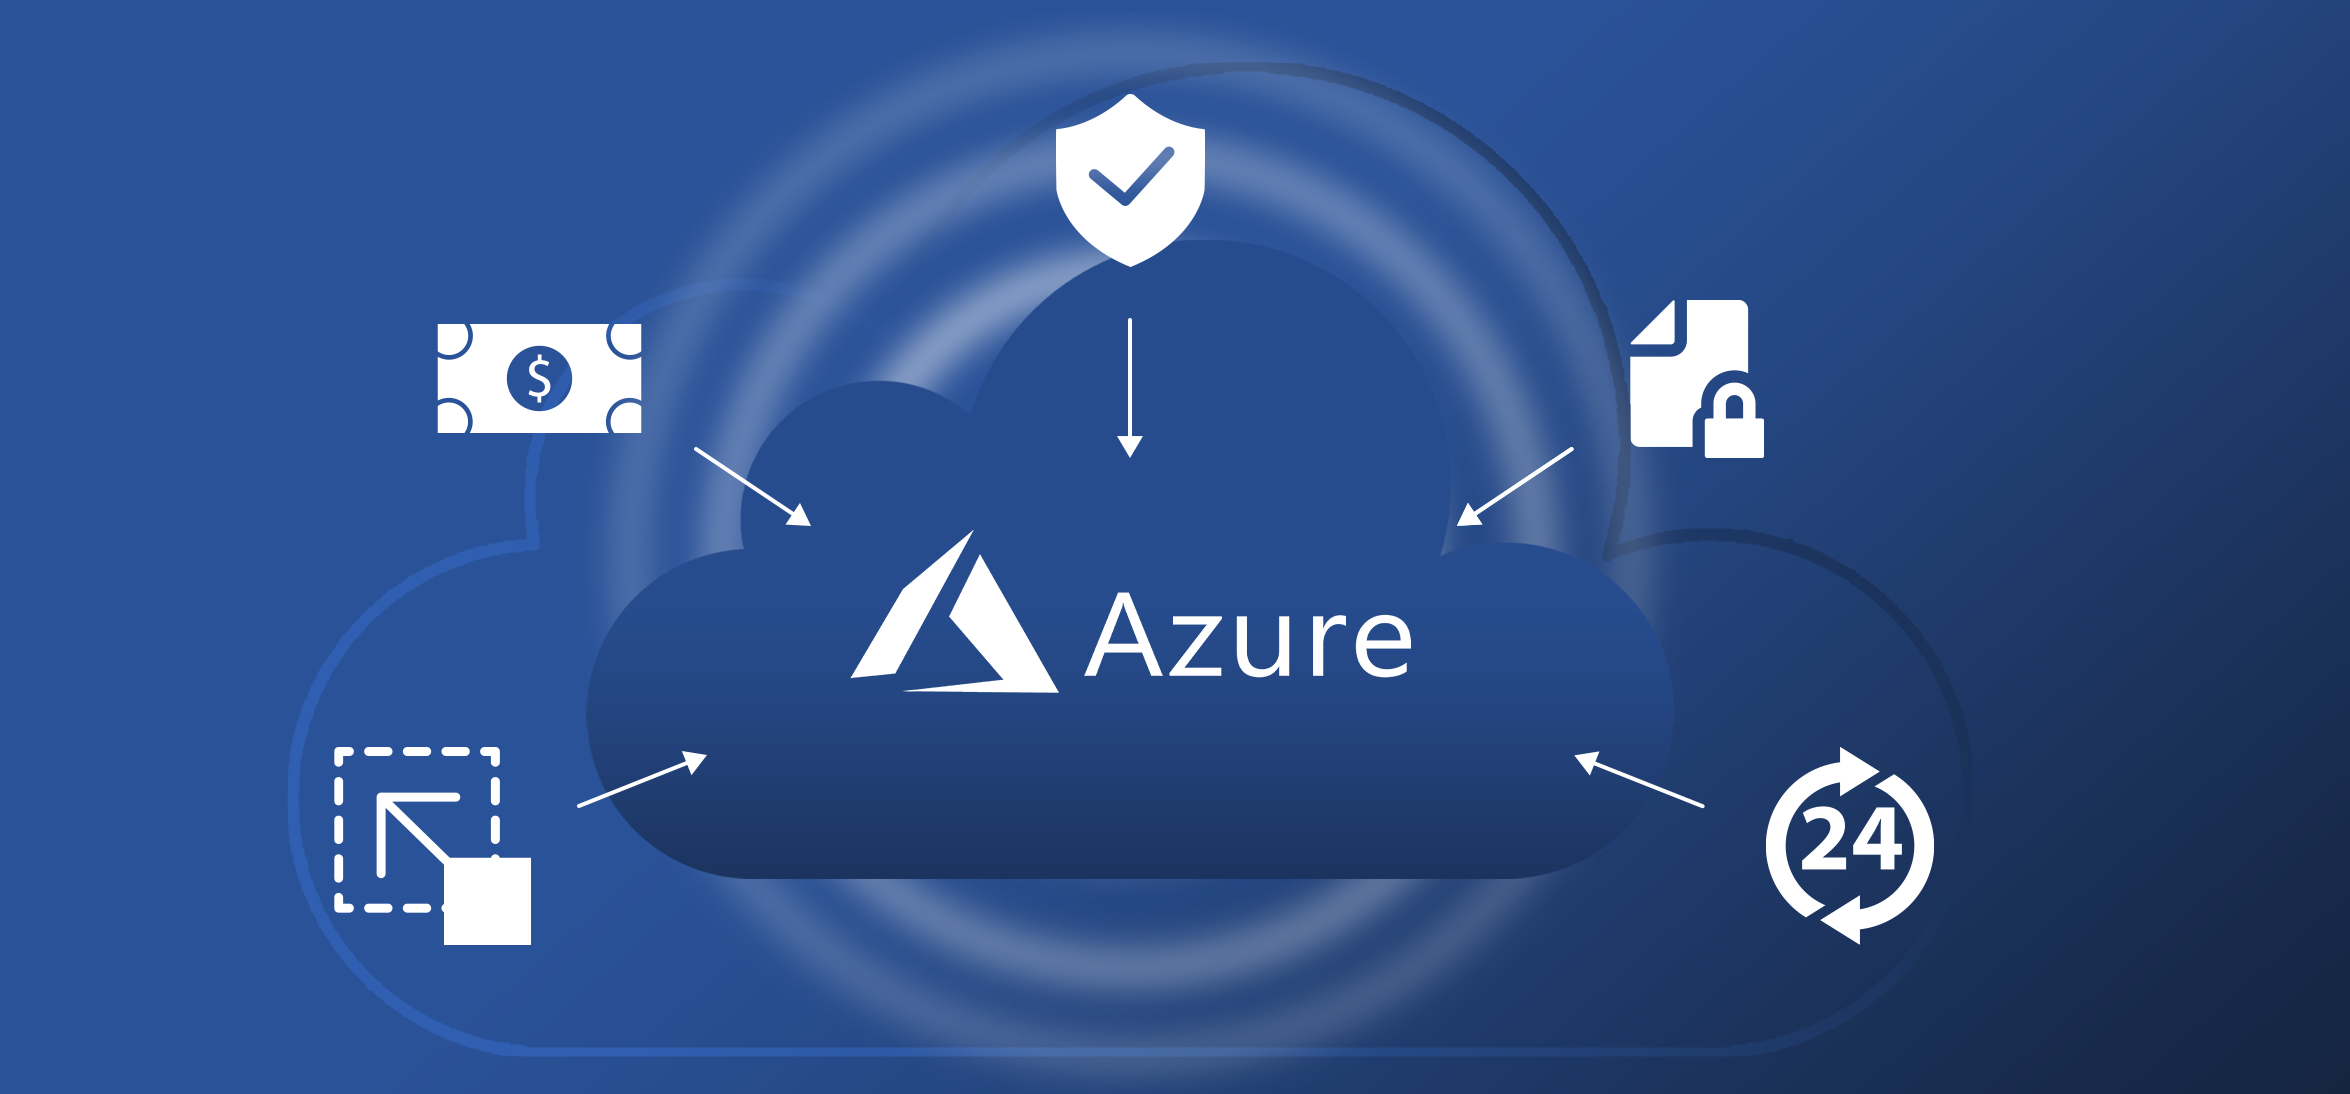 Microsoft Azure Administration and Consulting Services in Descanso CA, 91916